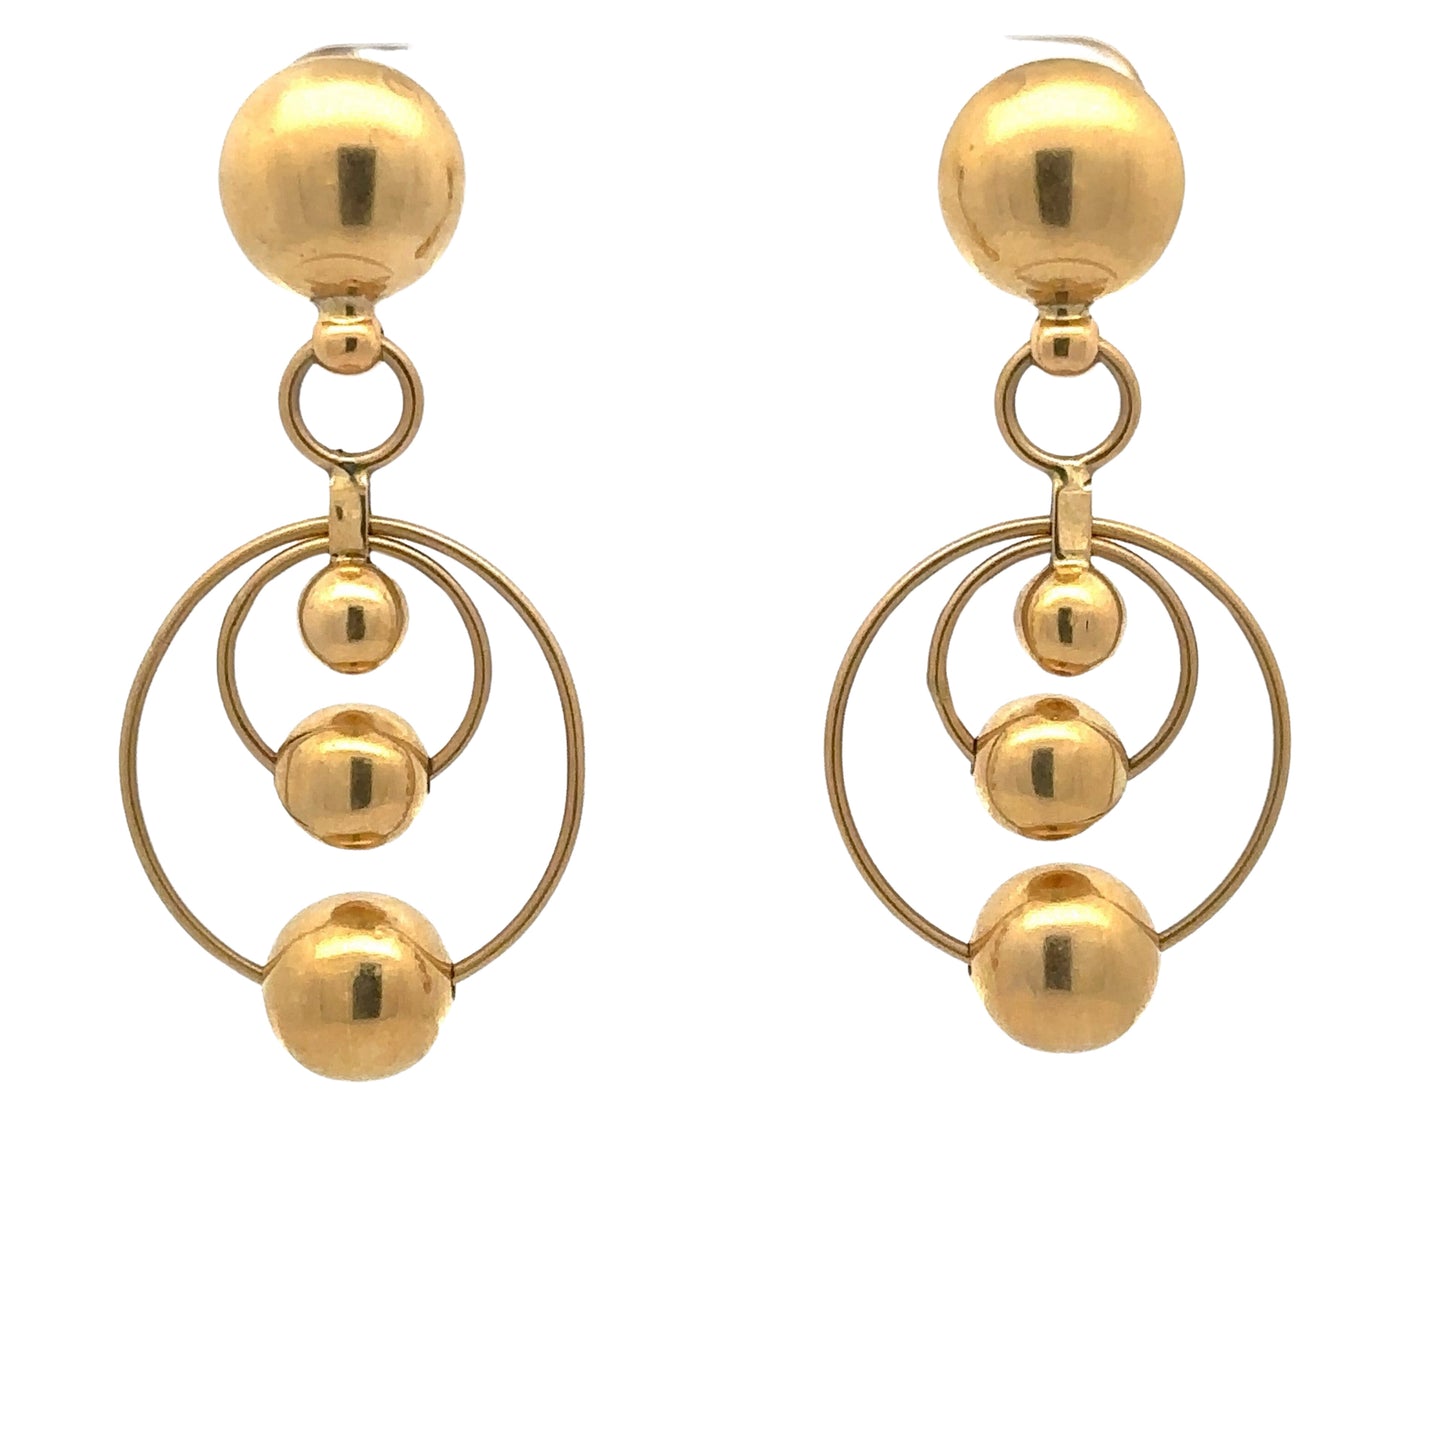 Yellow gold drop earrings with 2 hoops at the bottom and 4 gold spheres